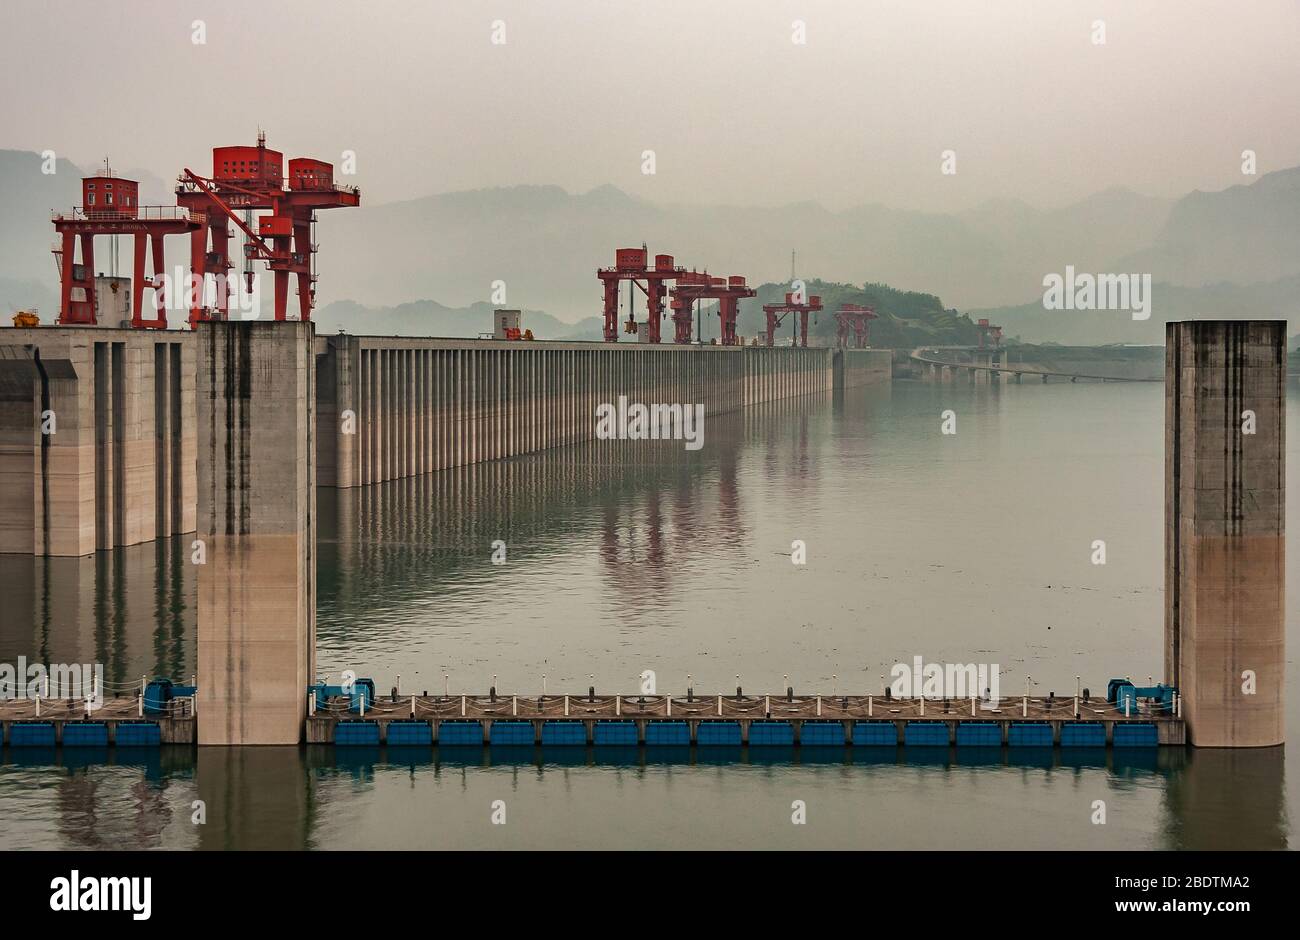 Three Gorges Dam, China - May 6, 2010: Yangtze River. Morning,  up-river wider shot along the brown concrete wall with red cranes on top on greenish w Stock Photo